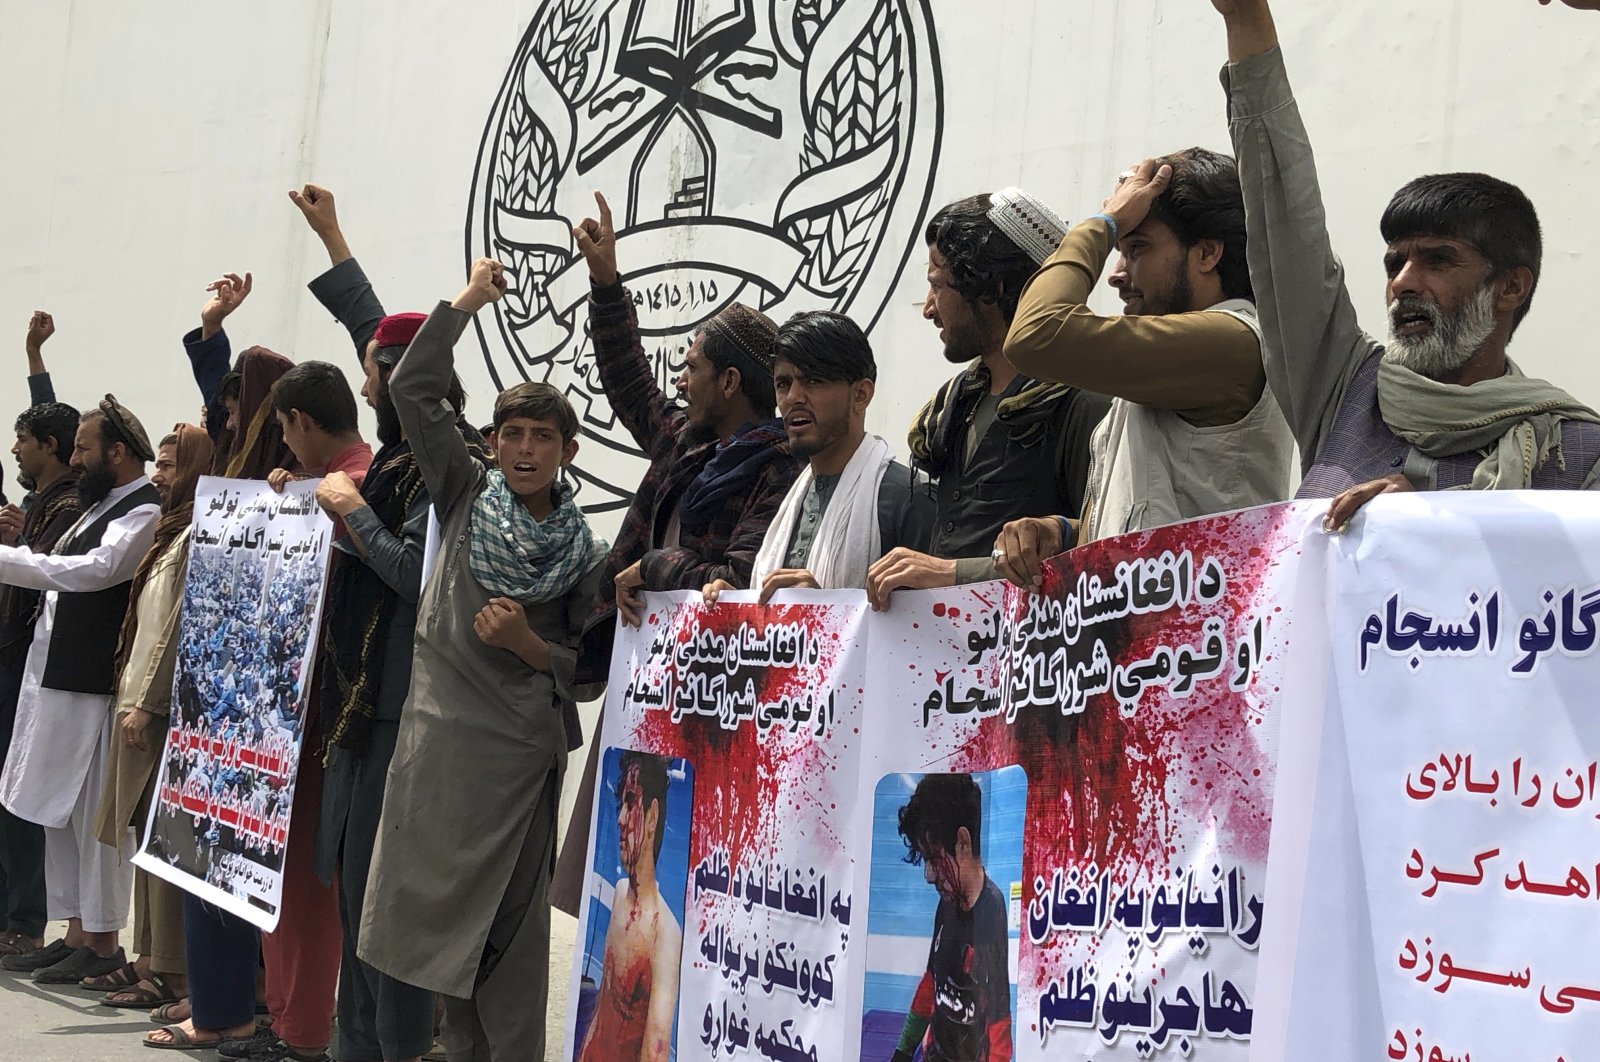 Afghans chant slogans against Iran during a demonstration in in Massoud Square, Kabul, Afghanistan, Tuesday, April 12, 2022. (AP Photo)